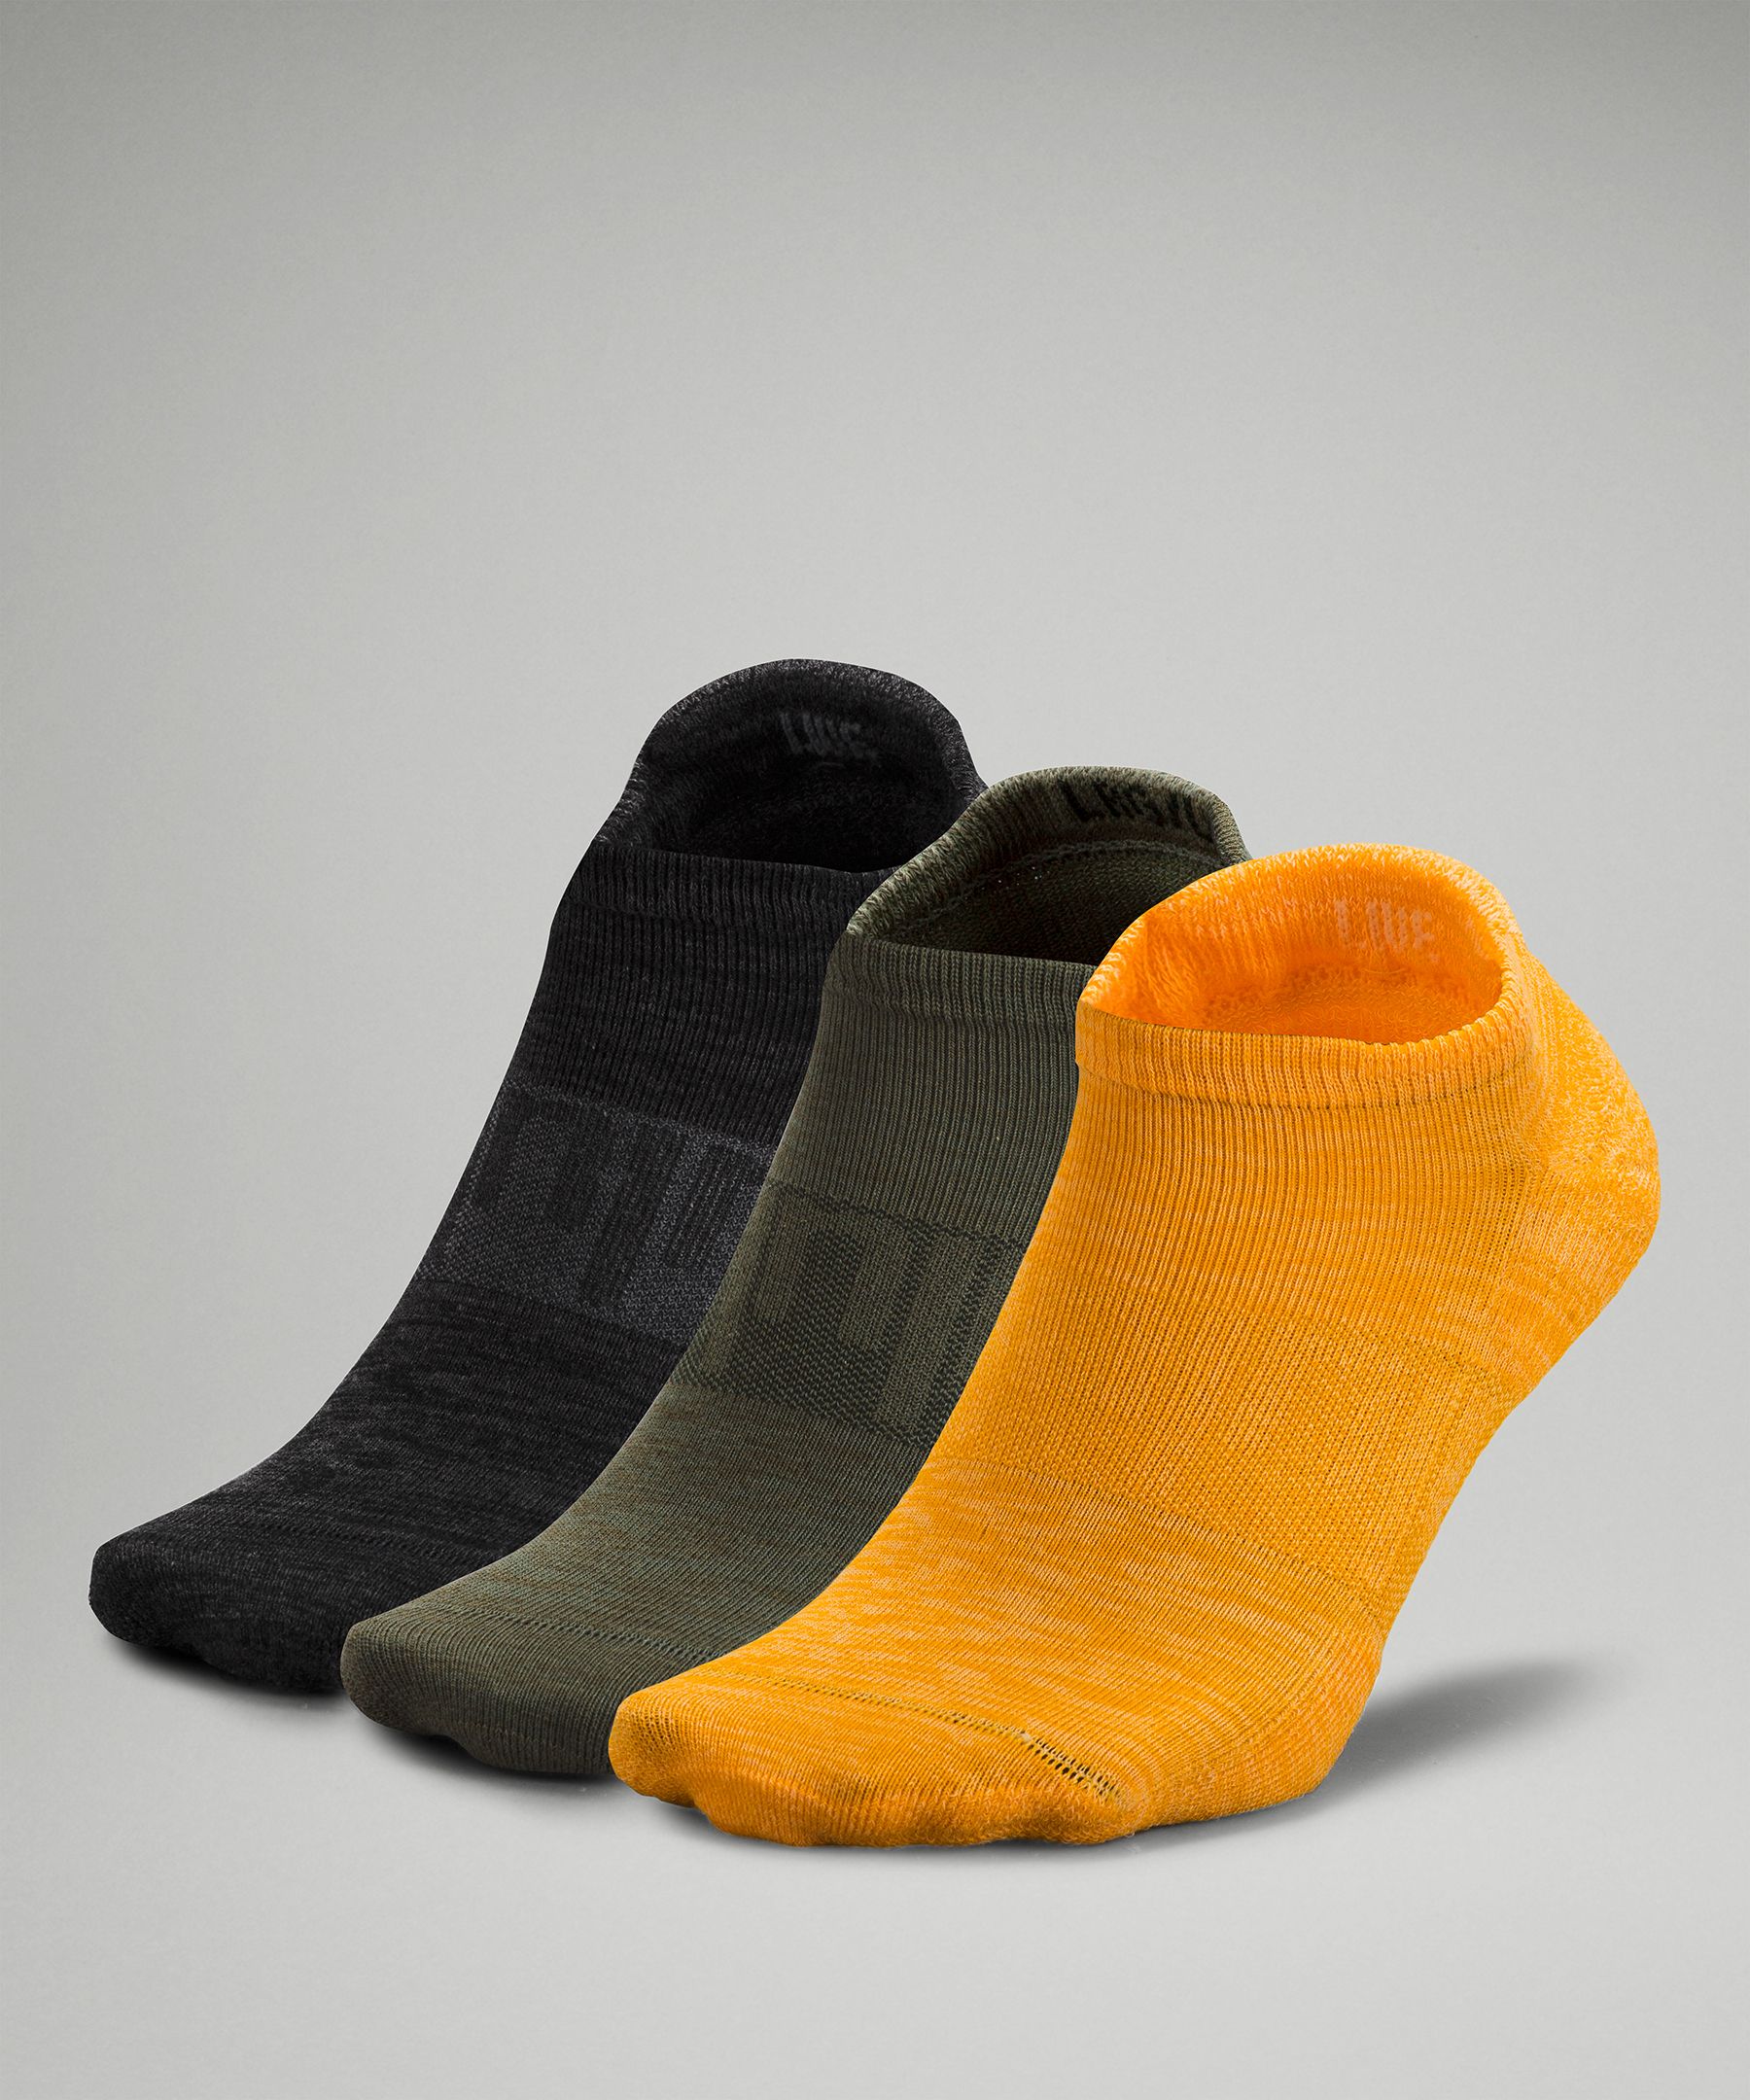 Lululemon Daily Stride Low-ankle Socks 3 Pack In Clementine/green Twill/black